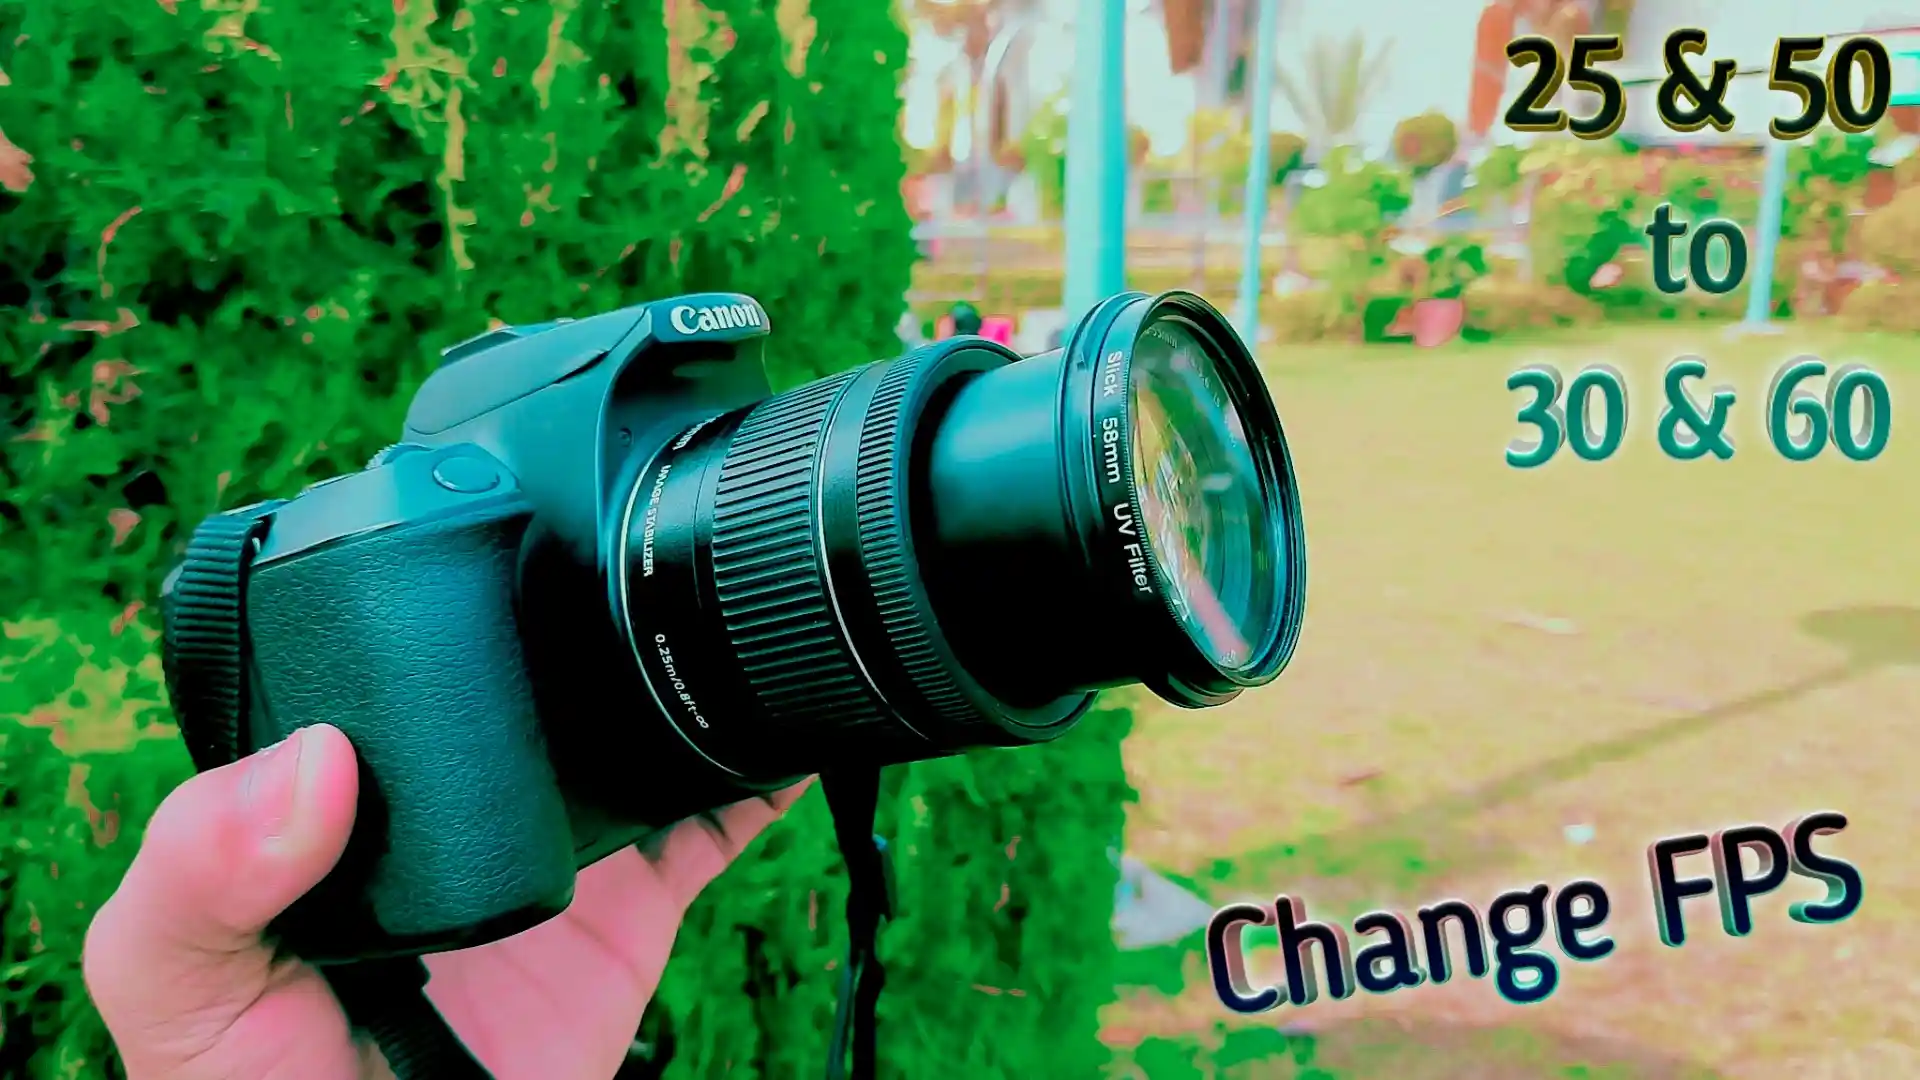 how to Change Frame rate 50 to 60fps in Canon 200d Dslr